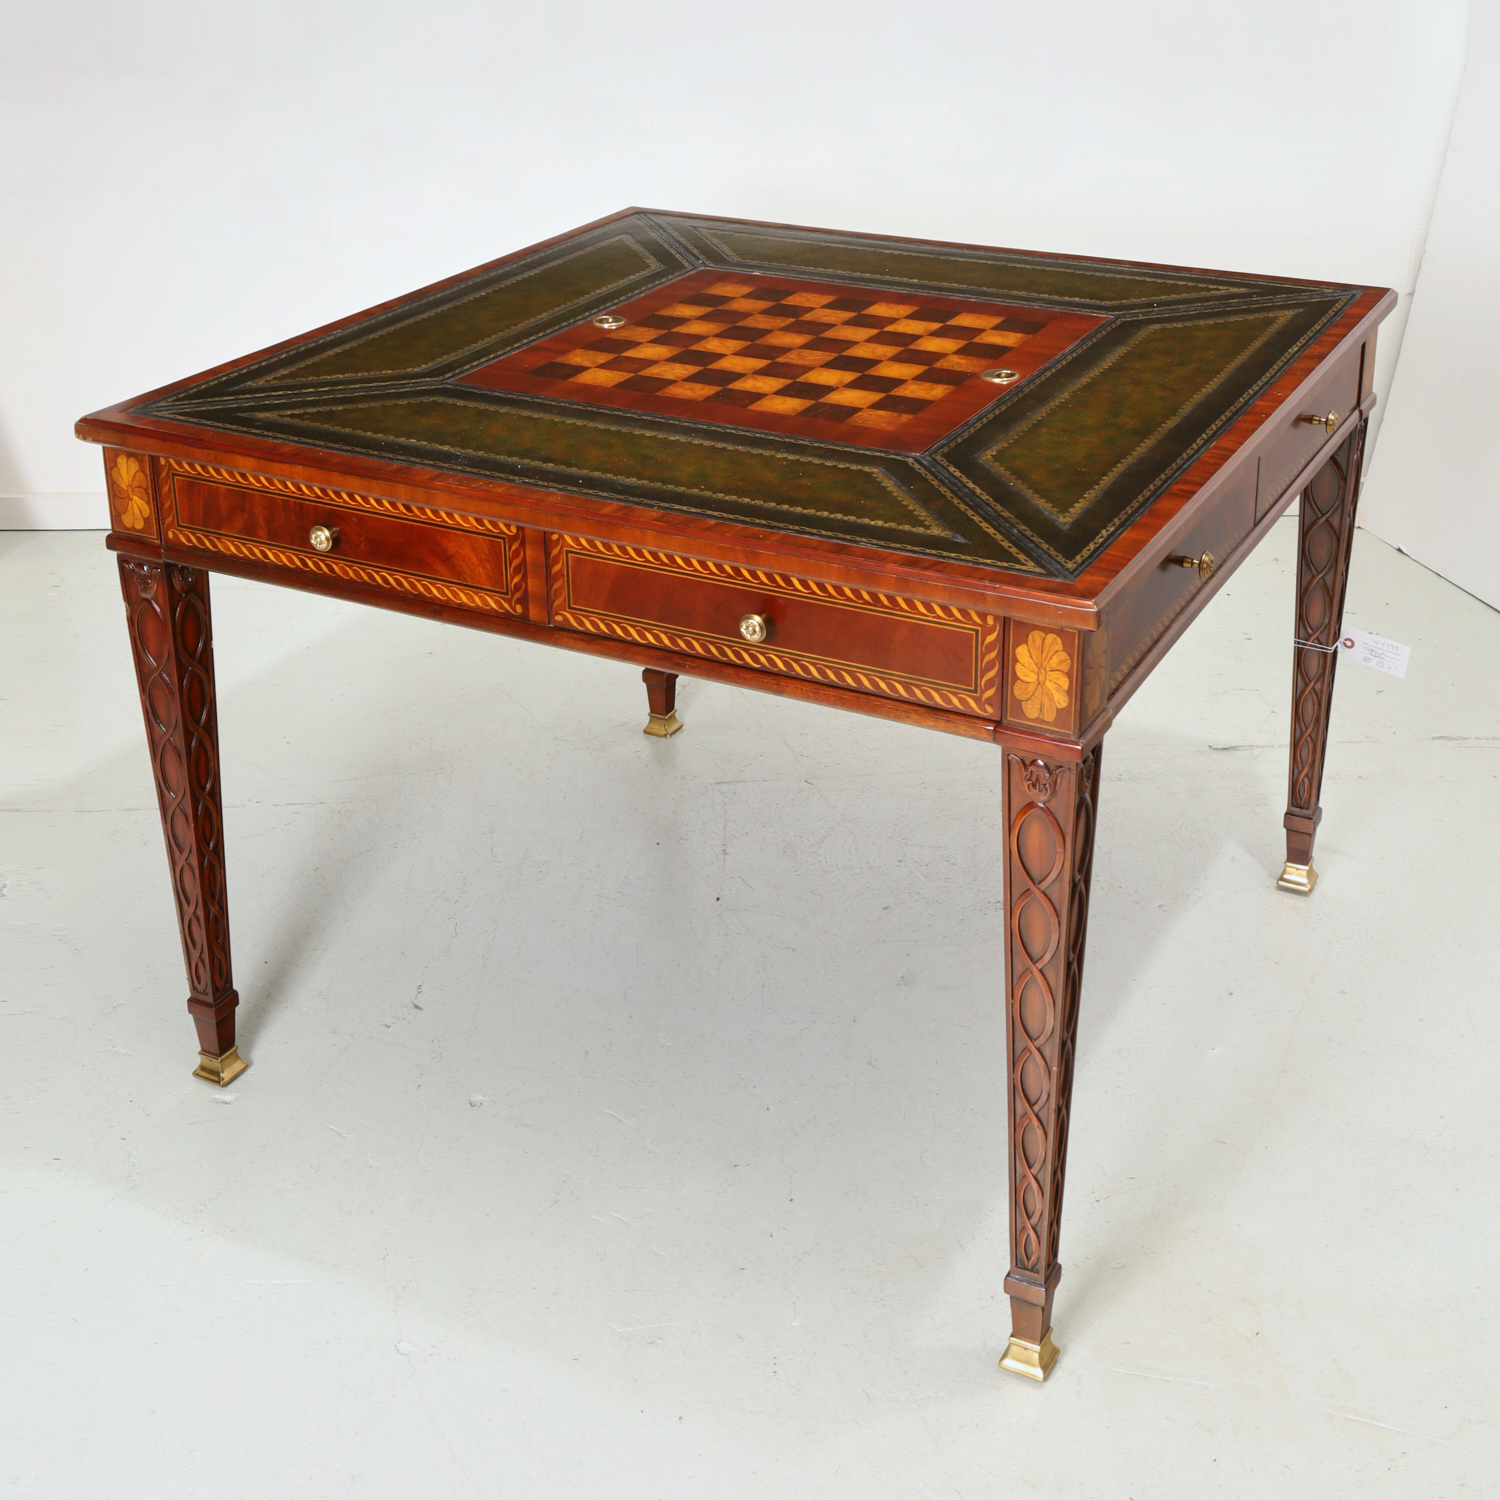 MAITLAND SMITH MARQUETRY INLAID 361826